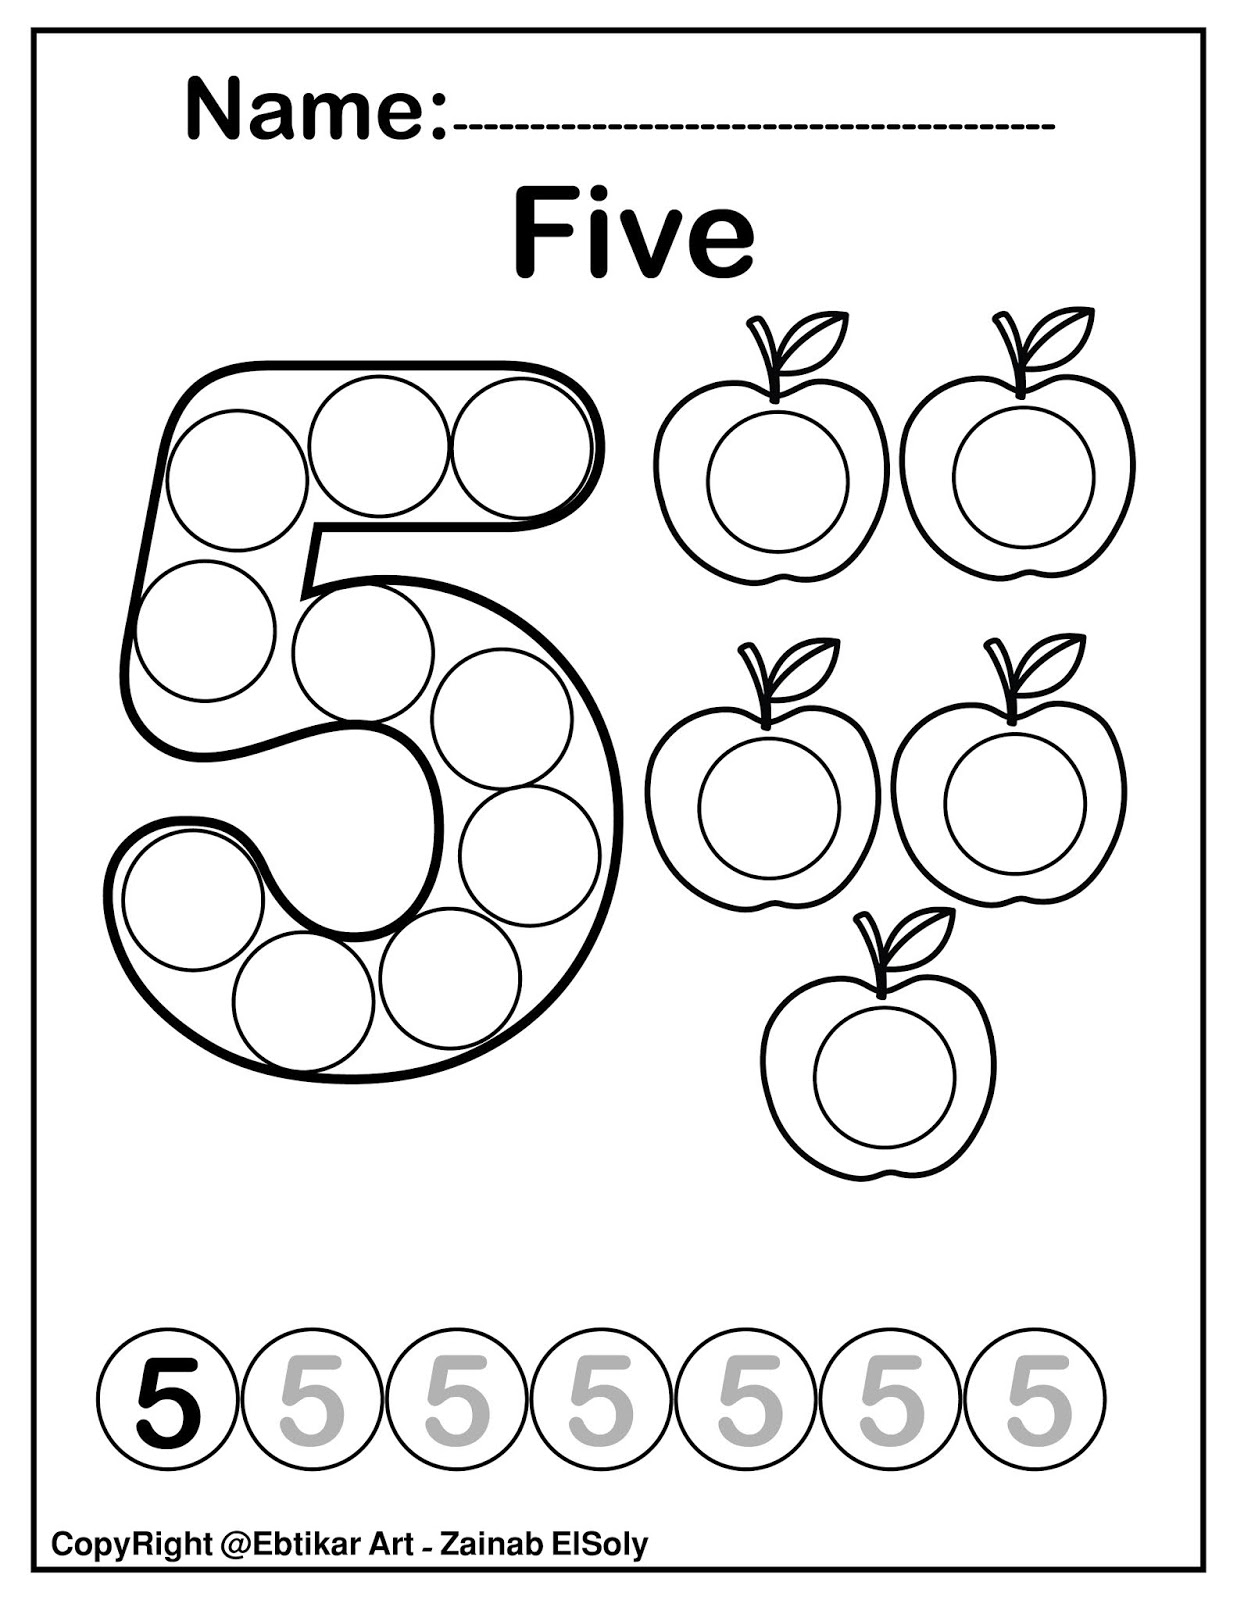 set-of-123-numbers-count-apples-dot-marker-activity-coloring-pages-for-kids